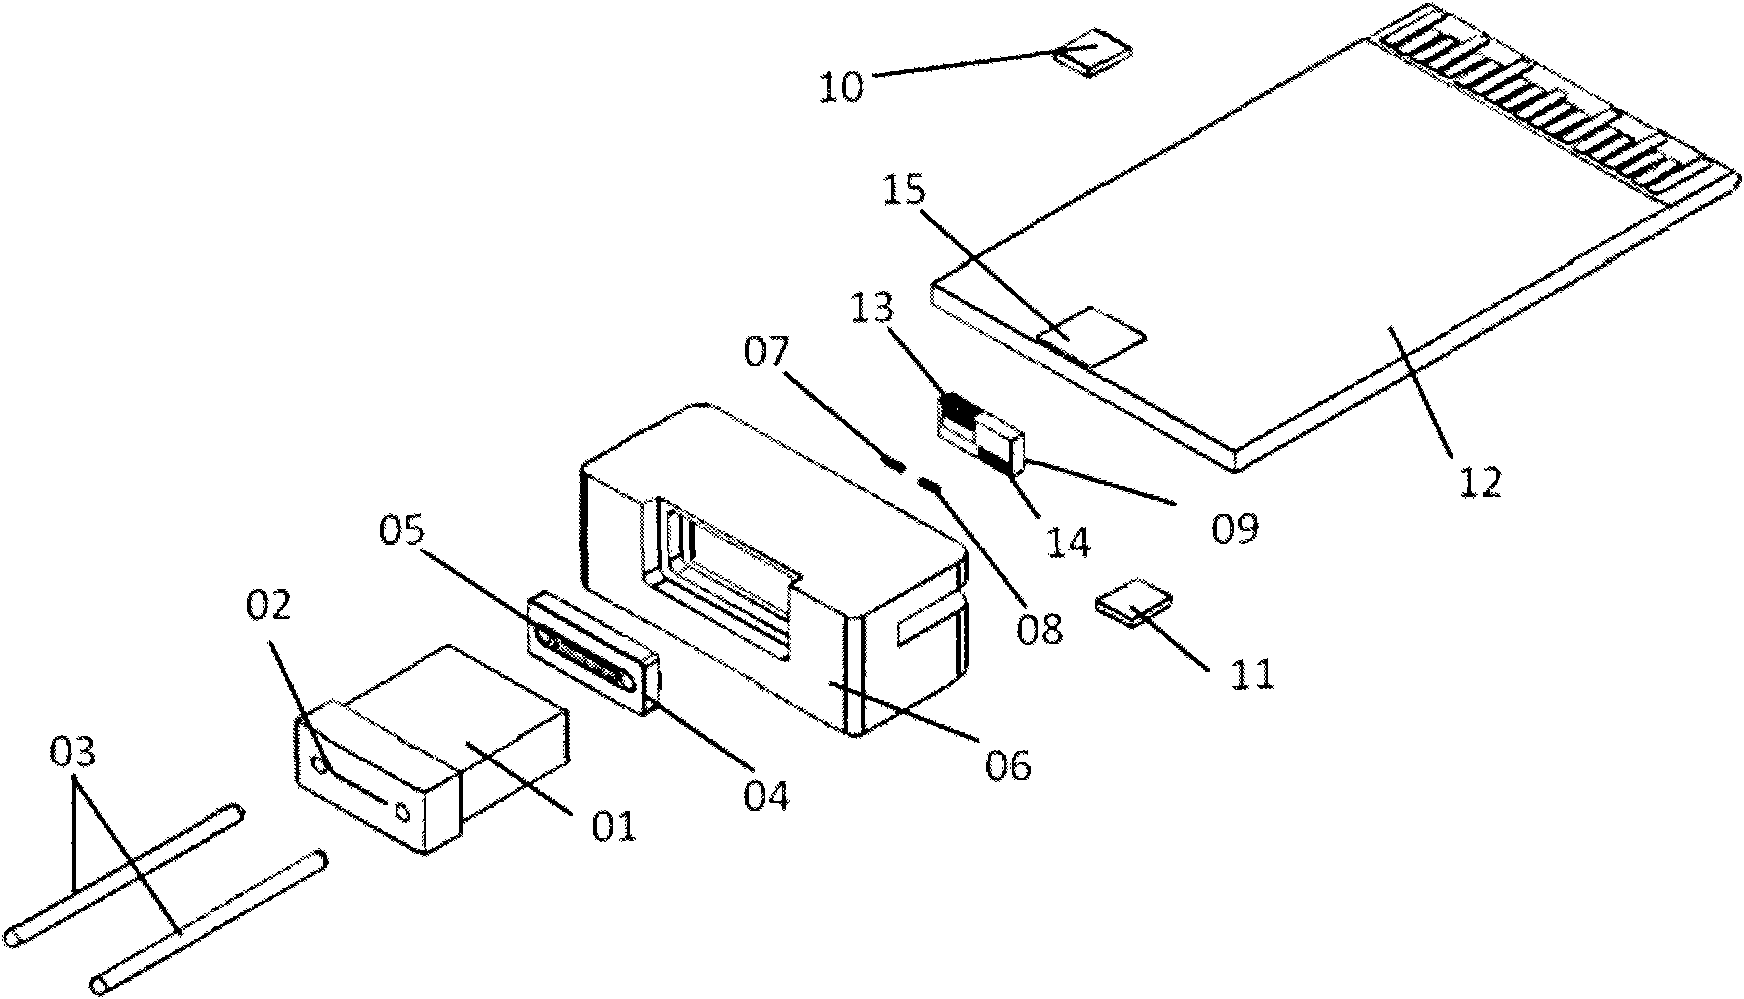 Light receiving and transmitting assembly for broadband parallel optics